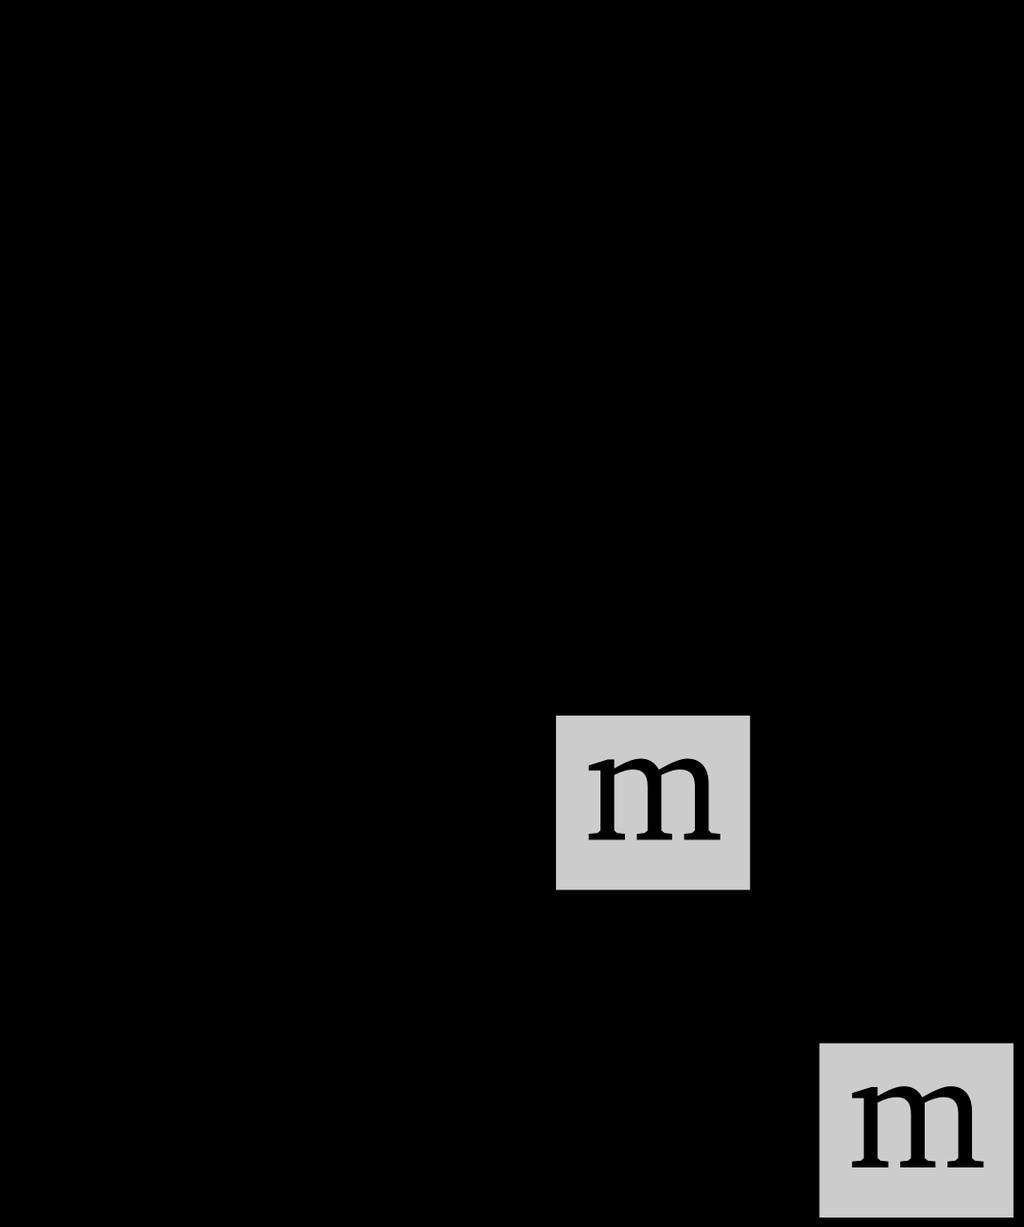 3. (10 points) Consider a block of mass m = 5 kg that is hanging on a light spring as shown The natural length of the spring is l 0 = 10 cm, and the spring constant is k = 20 N/cm.